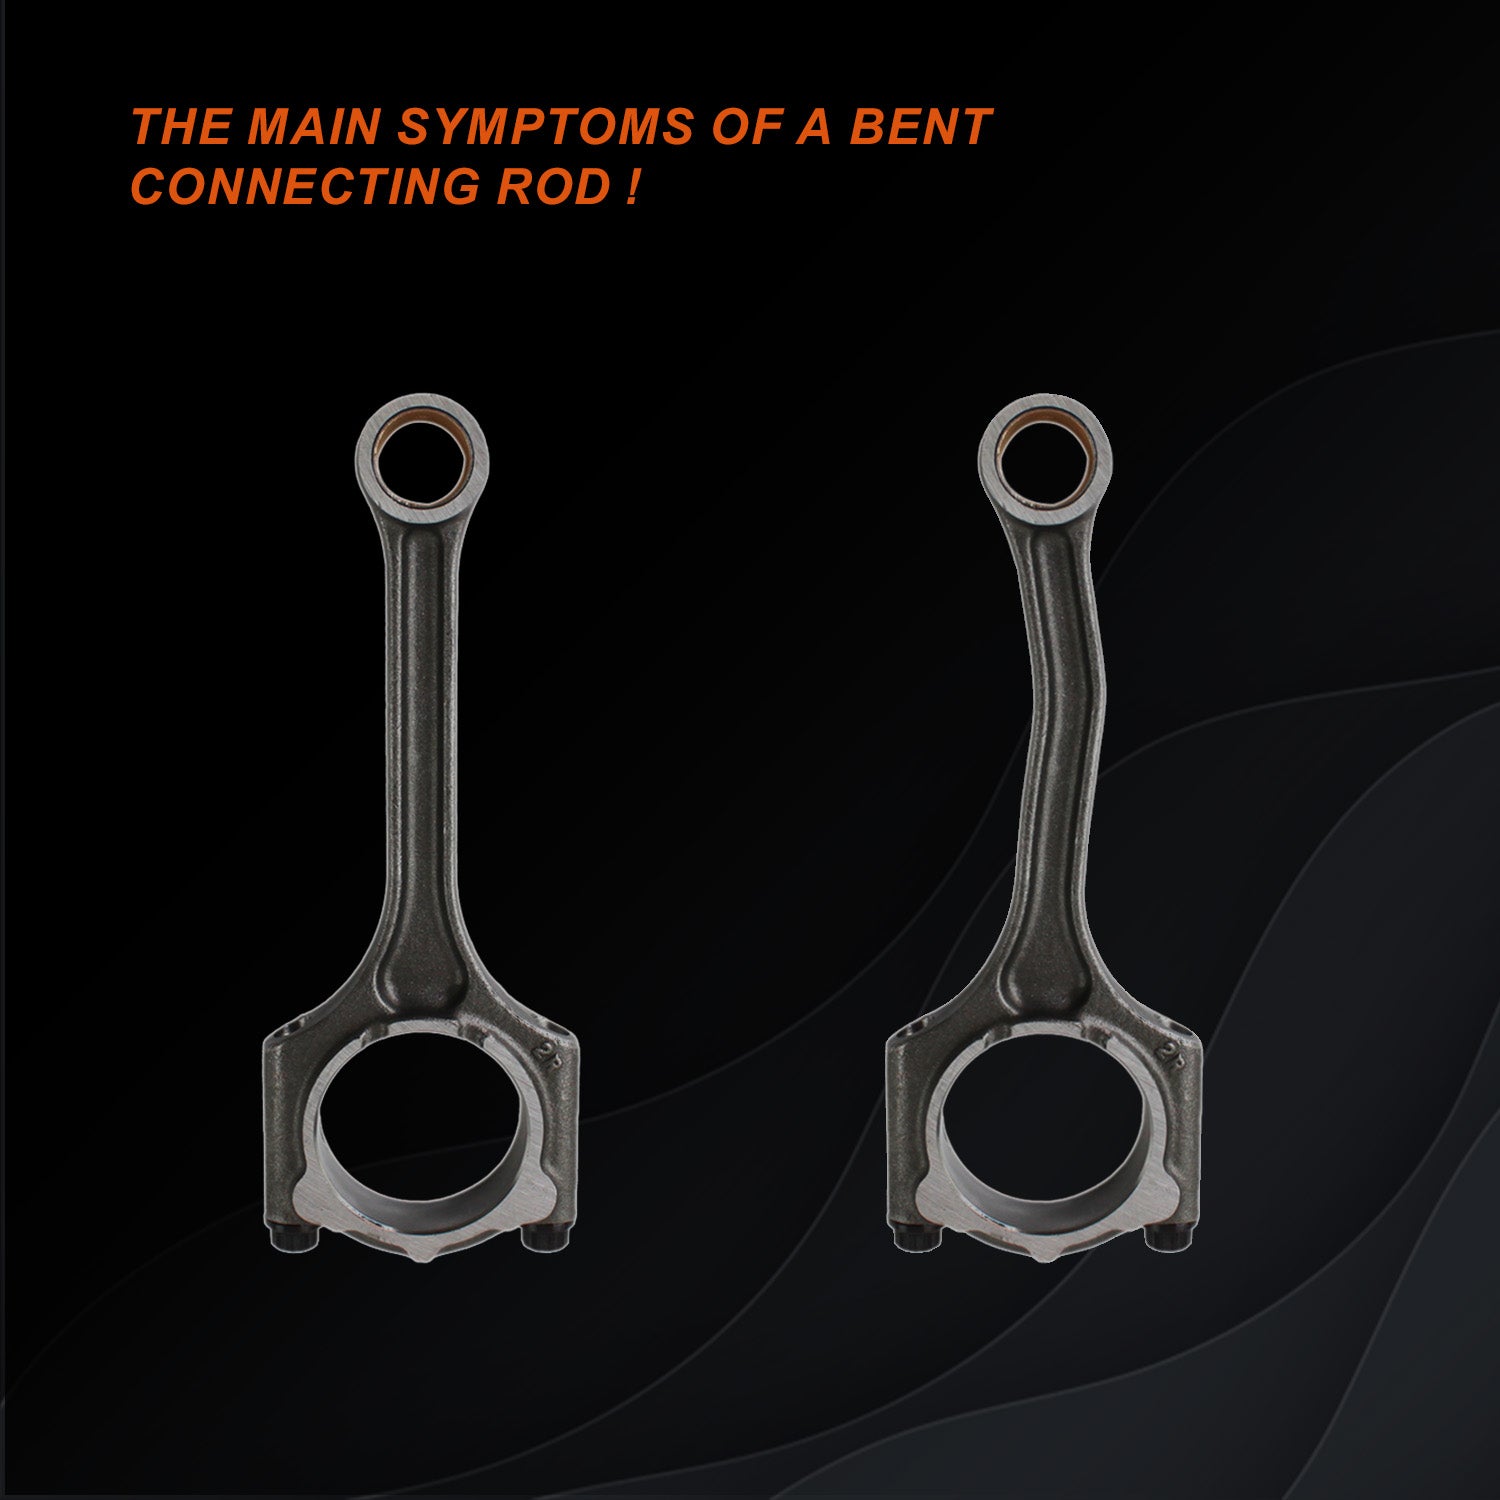 The main symptoms of a bent connecting rod